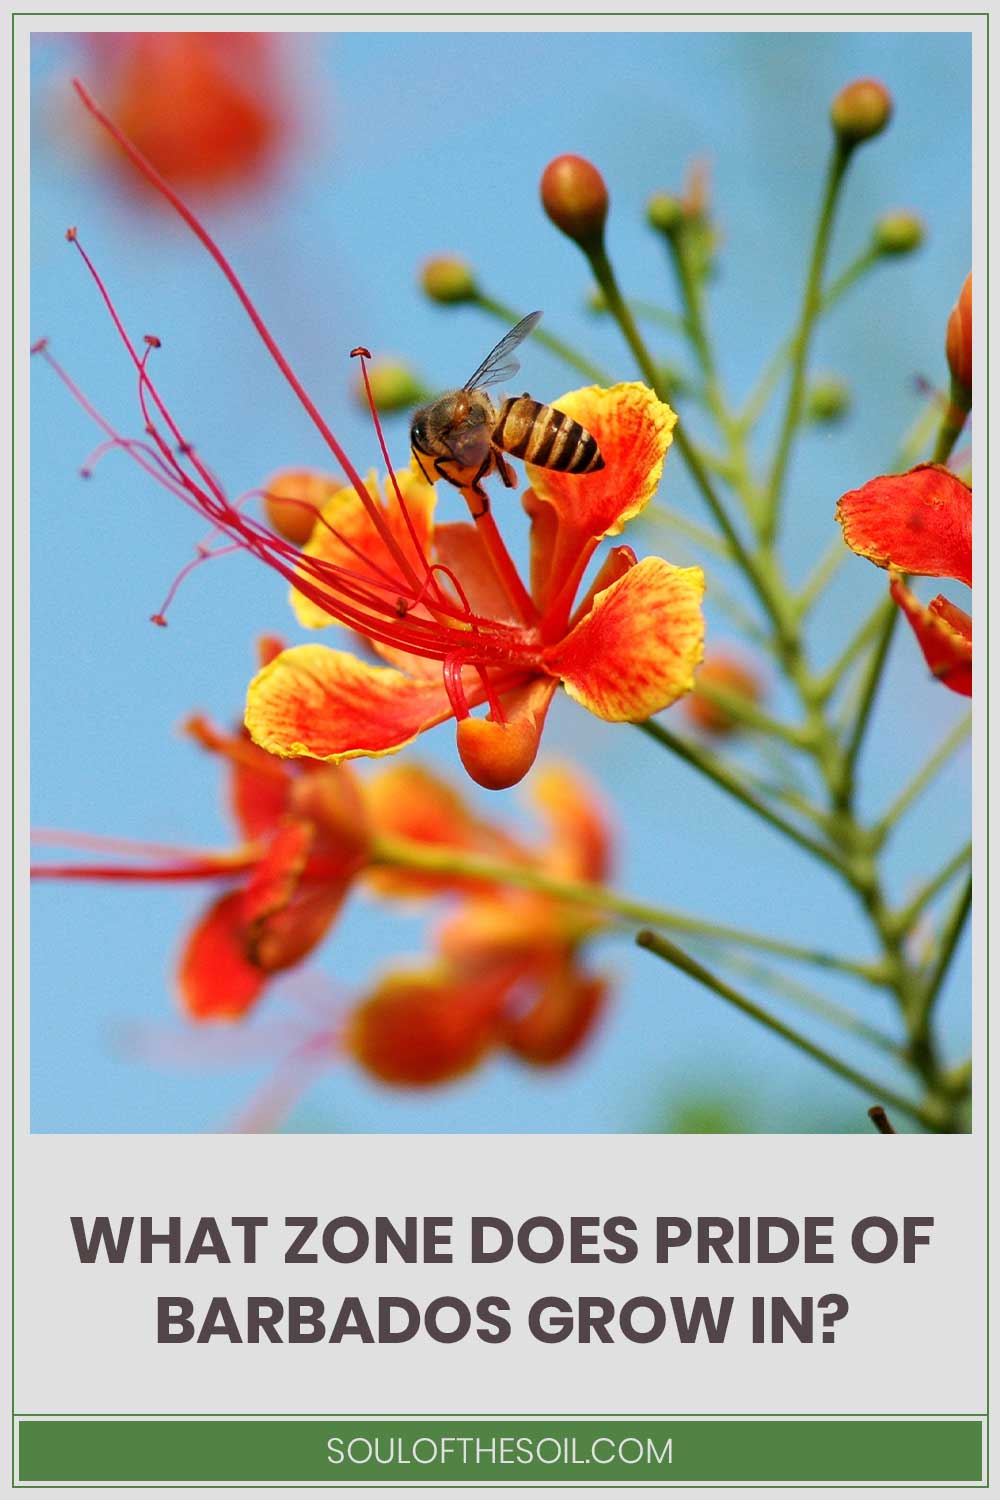 What Zone Does Pride Of Barbados Grow In?